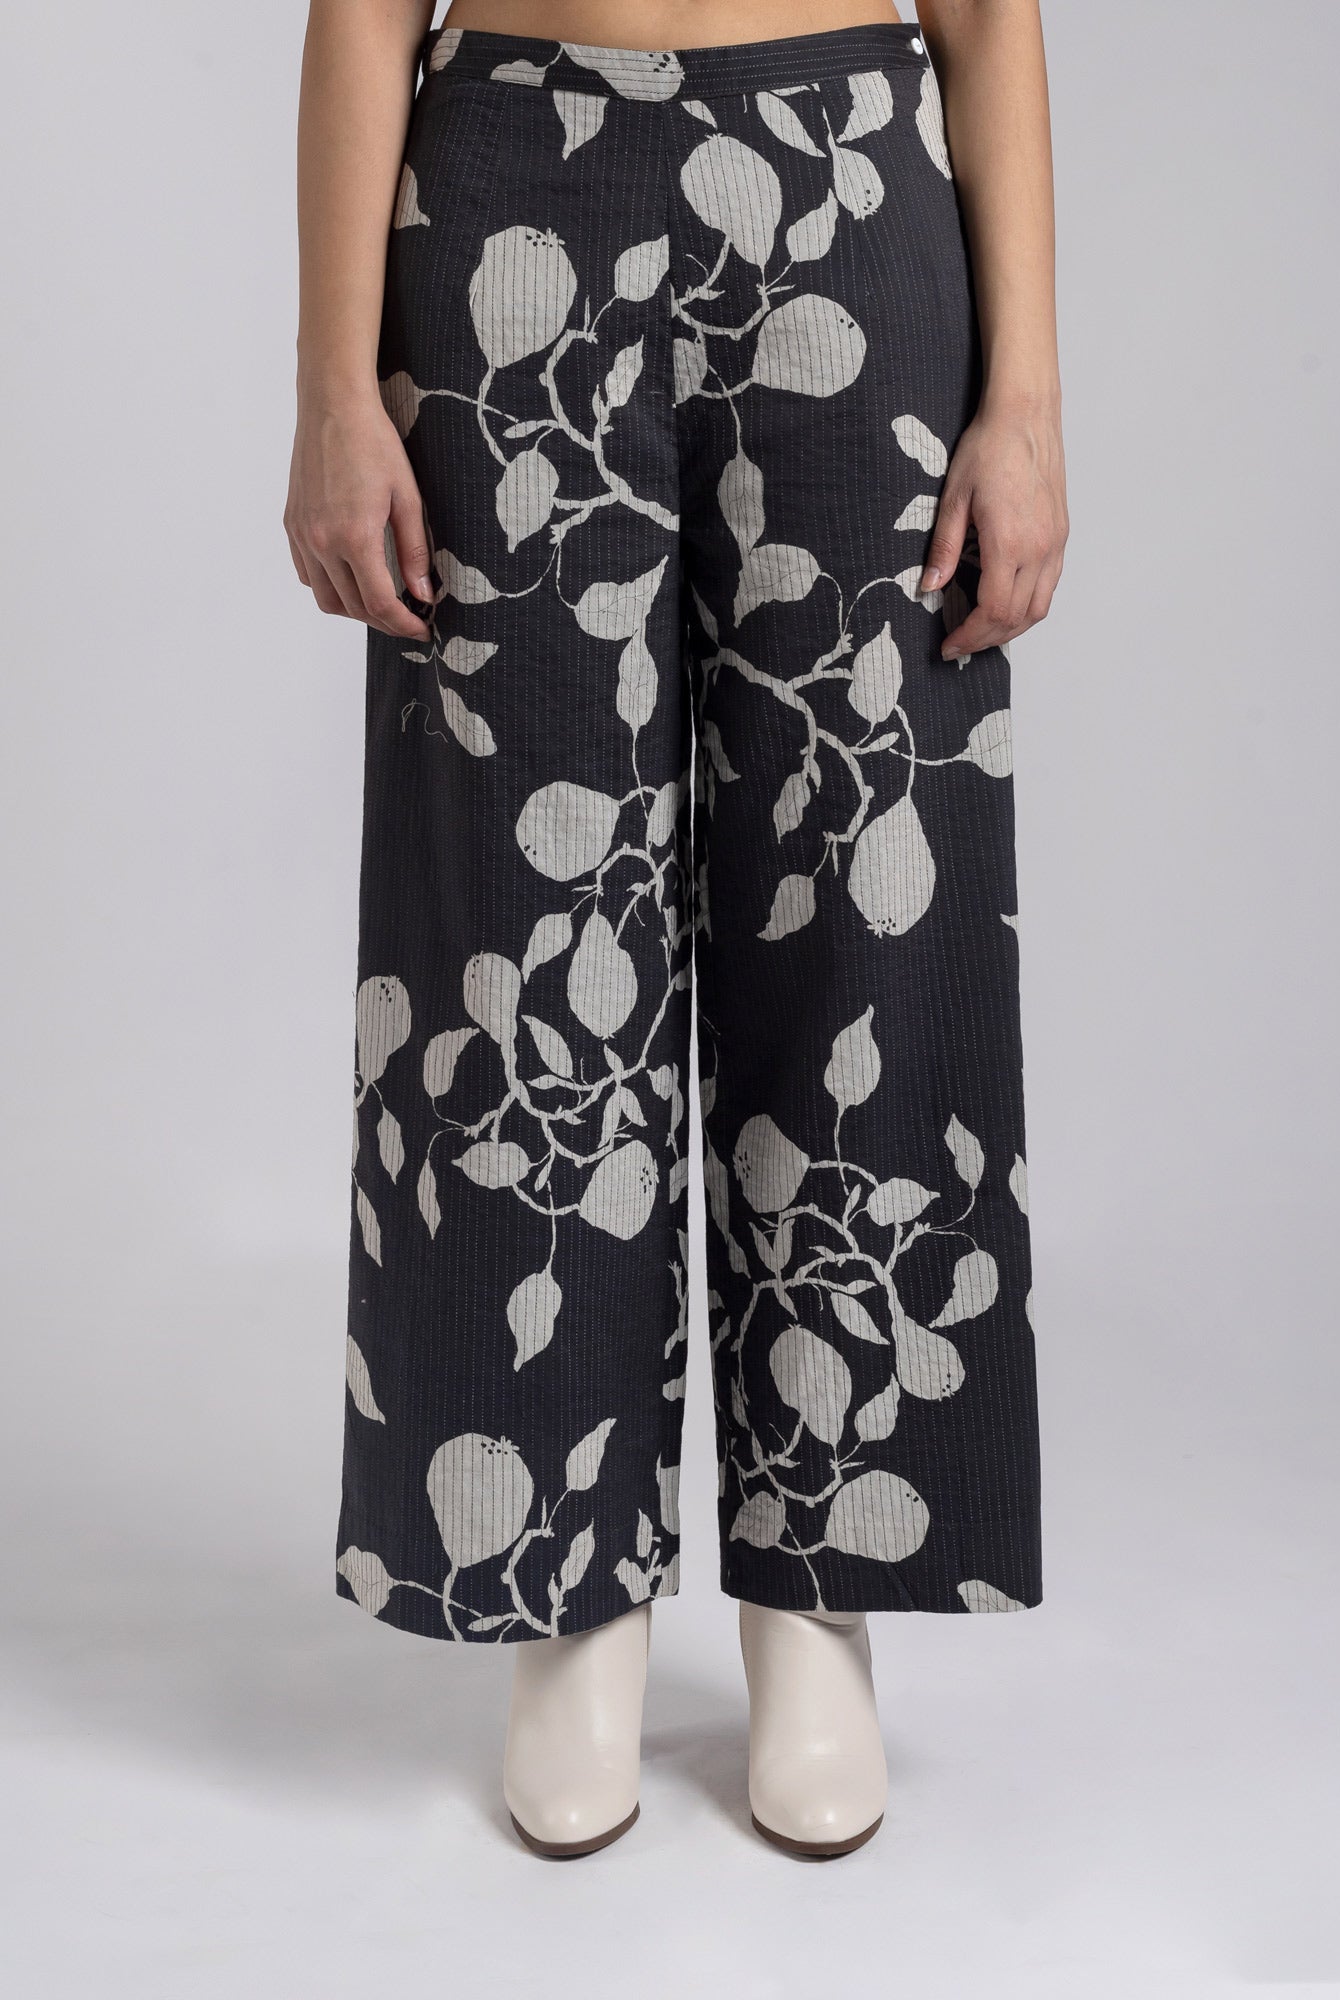 Vanmala Trousers - CiceroniTrousersShades of India